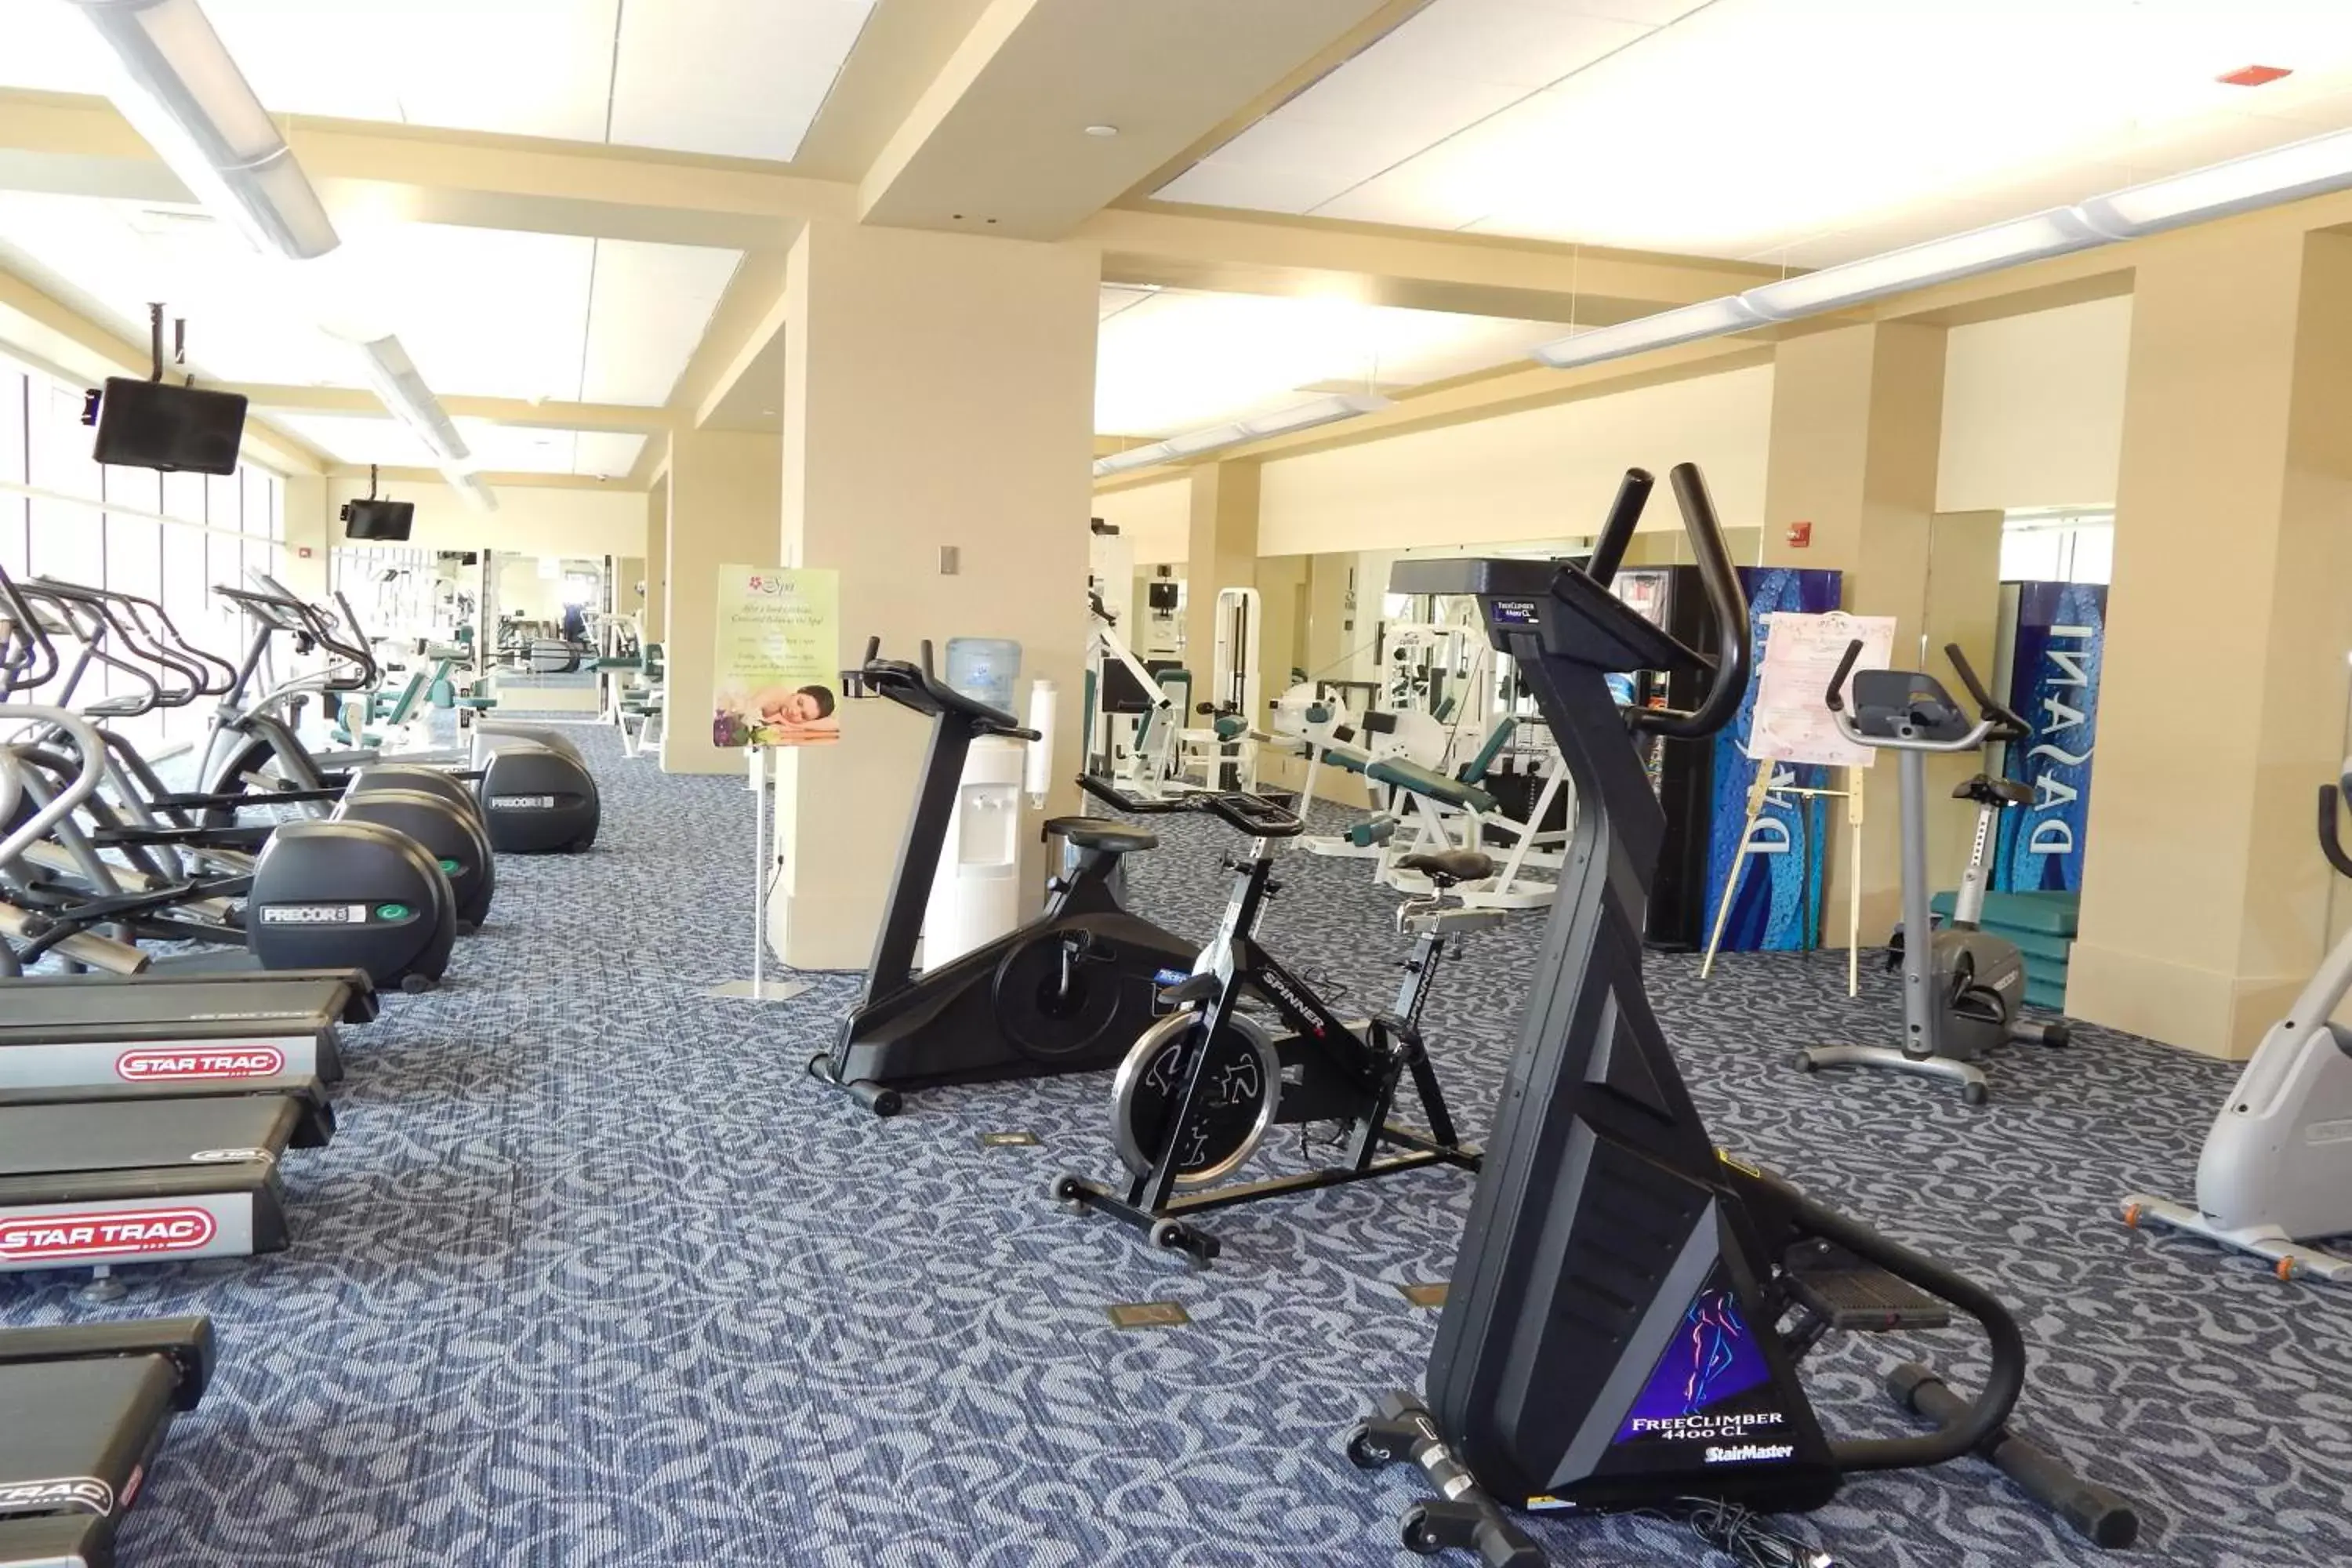 Sauna, Fitness Center/Facilities in Moody Gardens Hotel, Spa and Convention Center